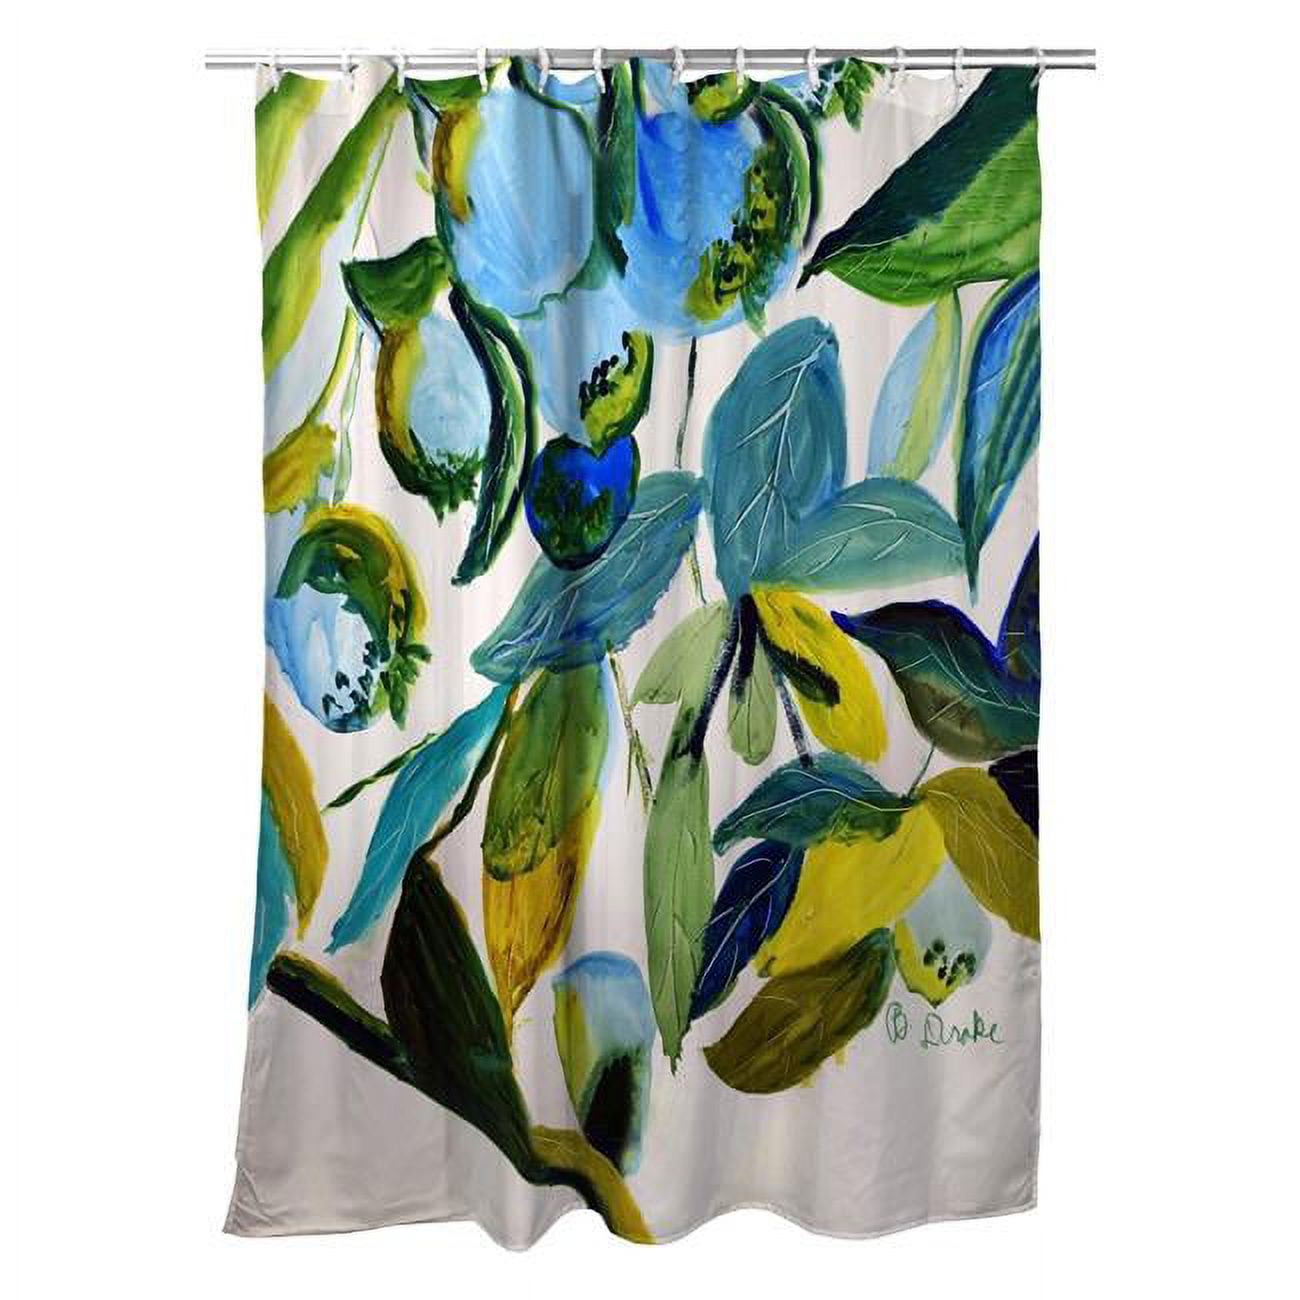 Picture of Betsydrake SH1158 71 x 74 in. Betsys Blue Berries Shower Curtain